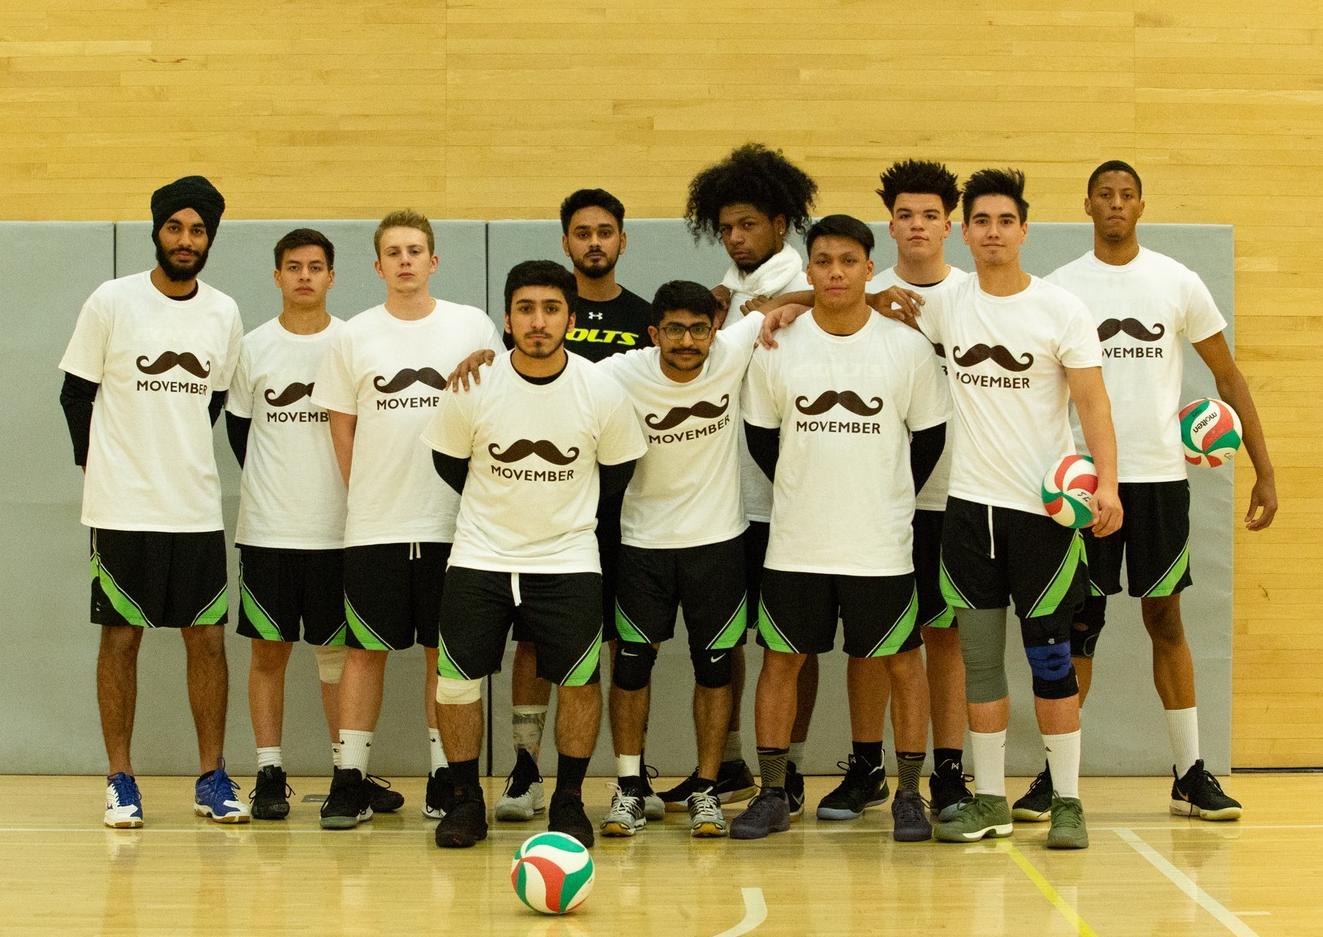 The men's team poses in their Movember shirts just before tip off against the George Brown Huskies on Thursday night. (Nicole Ventura/Colts Media)
